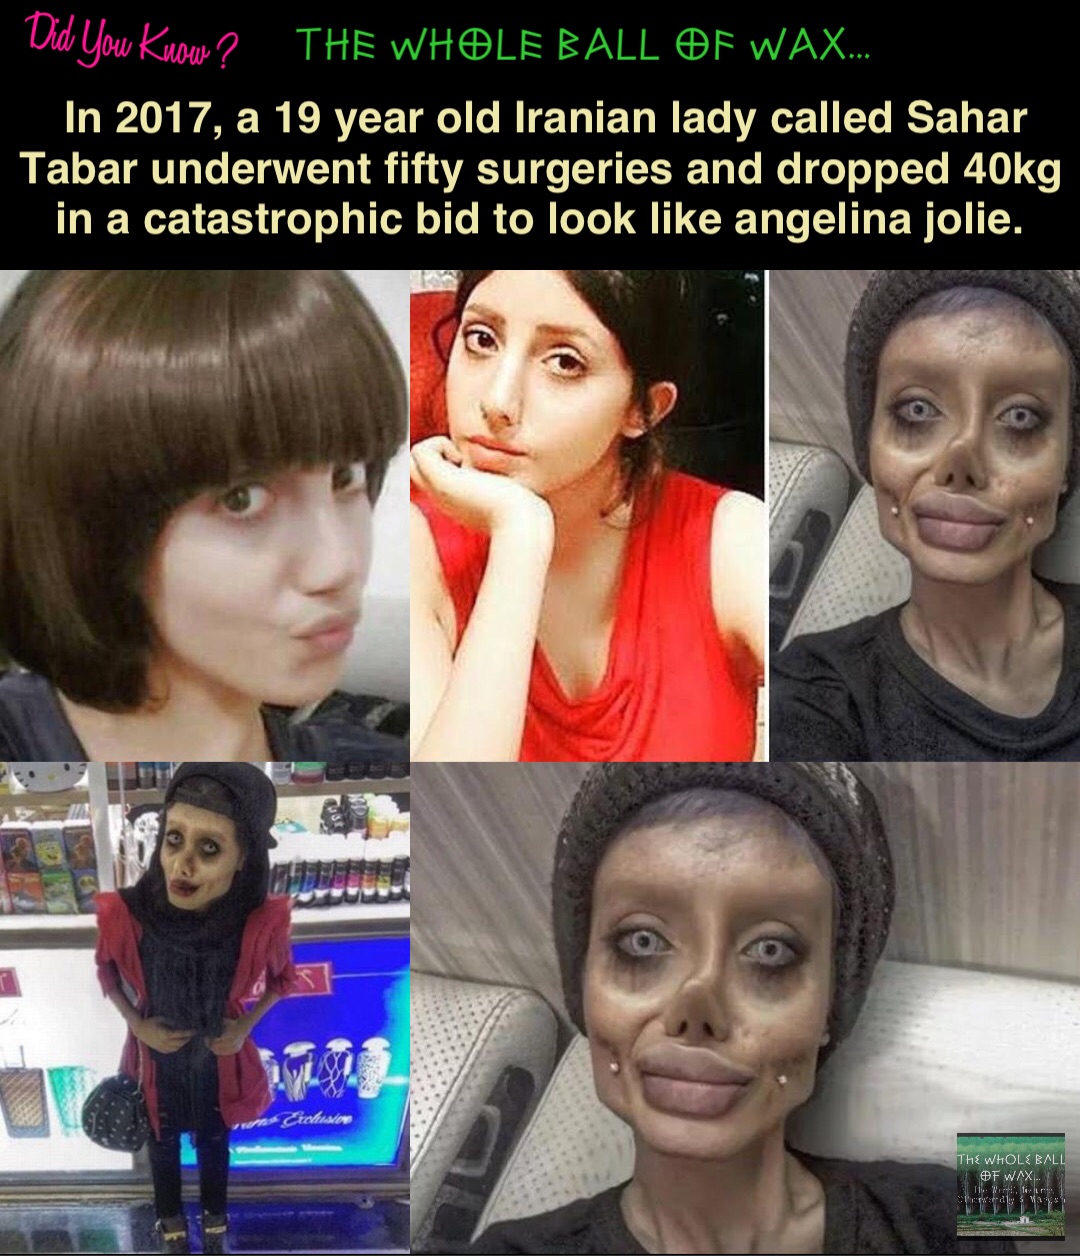 Double tap to edit In 2017, a 19 year old Iranian lady called Sahar Tabar underwent fifty surgeries and dropped 40kg in a catastrophic bid to look like angelina jolie.